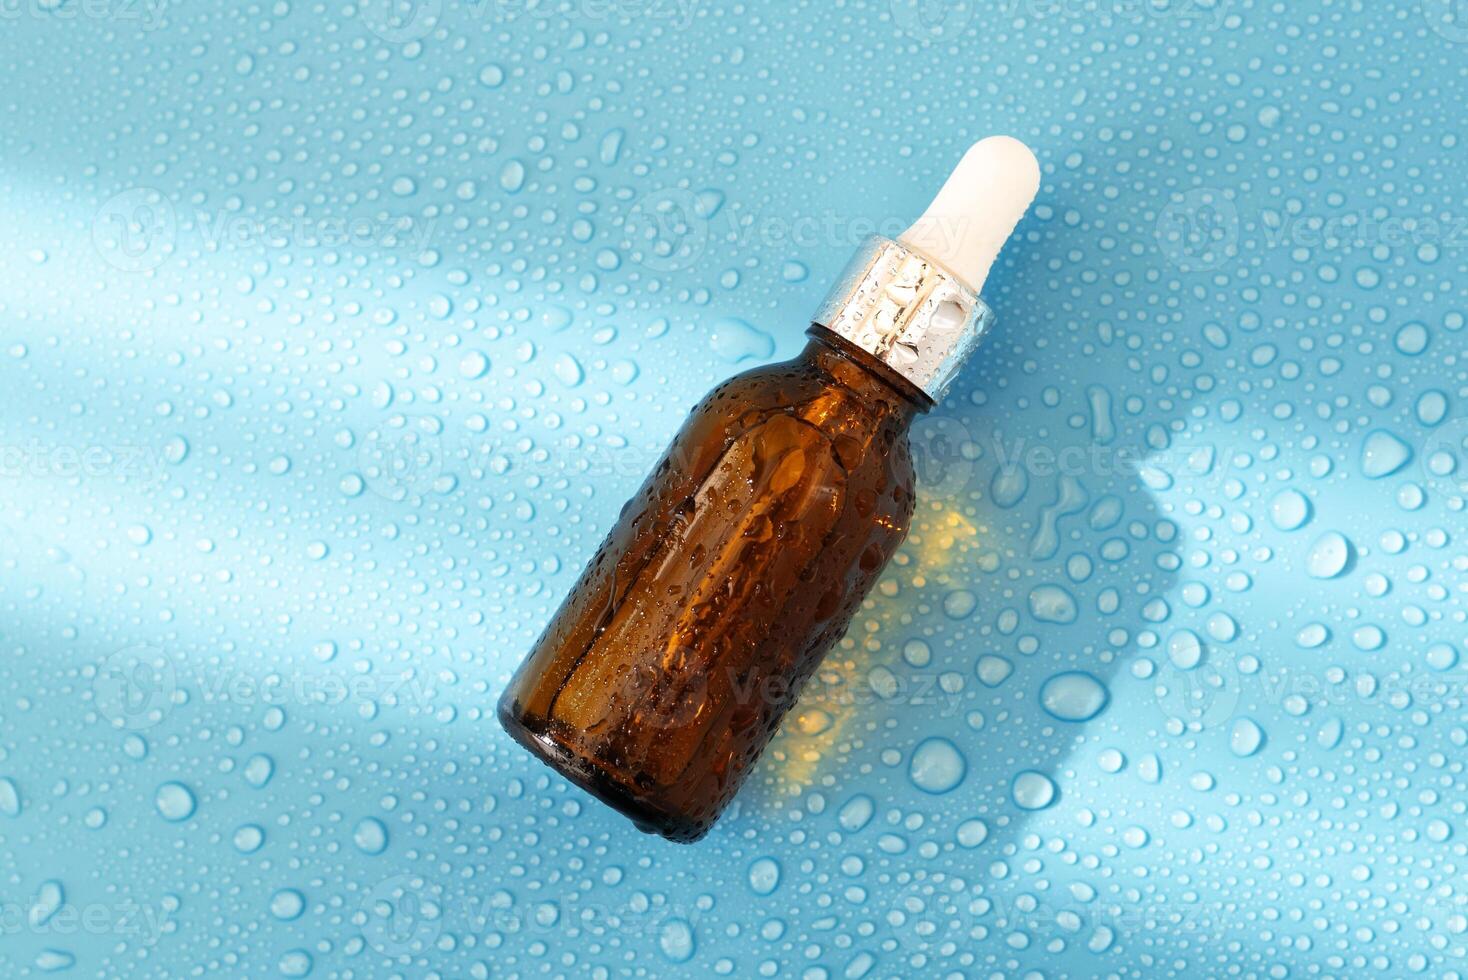 Serum bottle , oil cosmetic on blue background with hard light and water drops. with shadows flat lay, top view photo